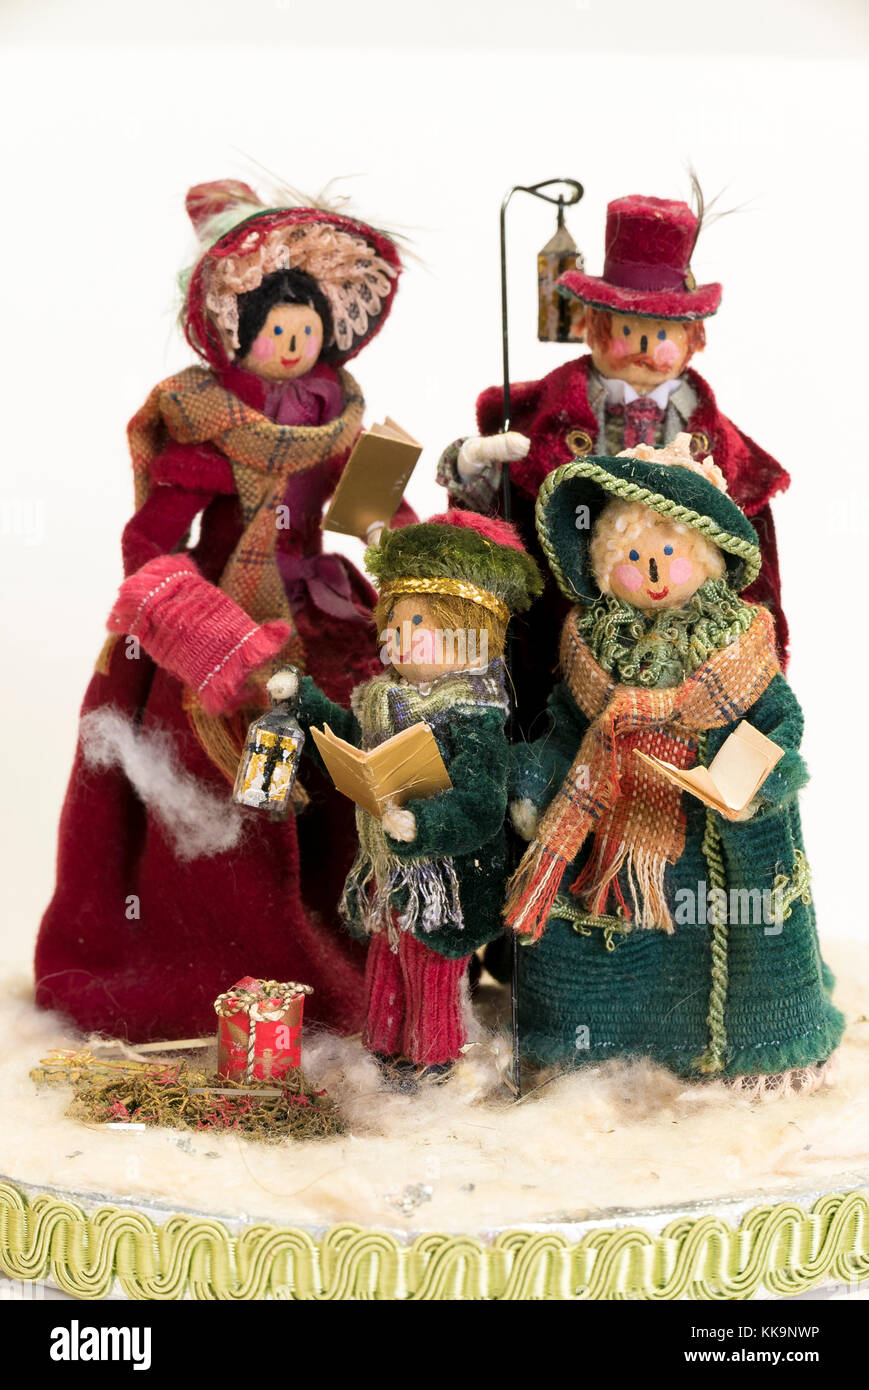 A Christmas festive decoration crafted from wooden pegs and assorted coloured fabrics, representing a family of four singing carols at Christmas Stock Photo